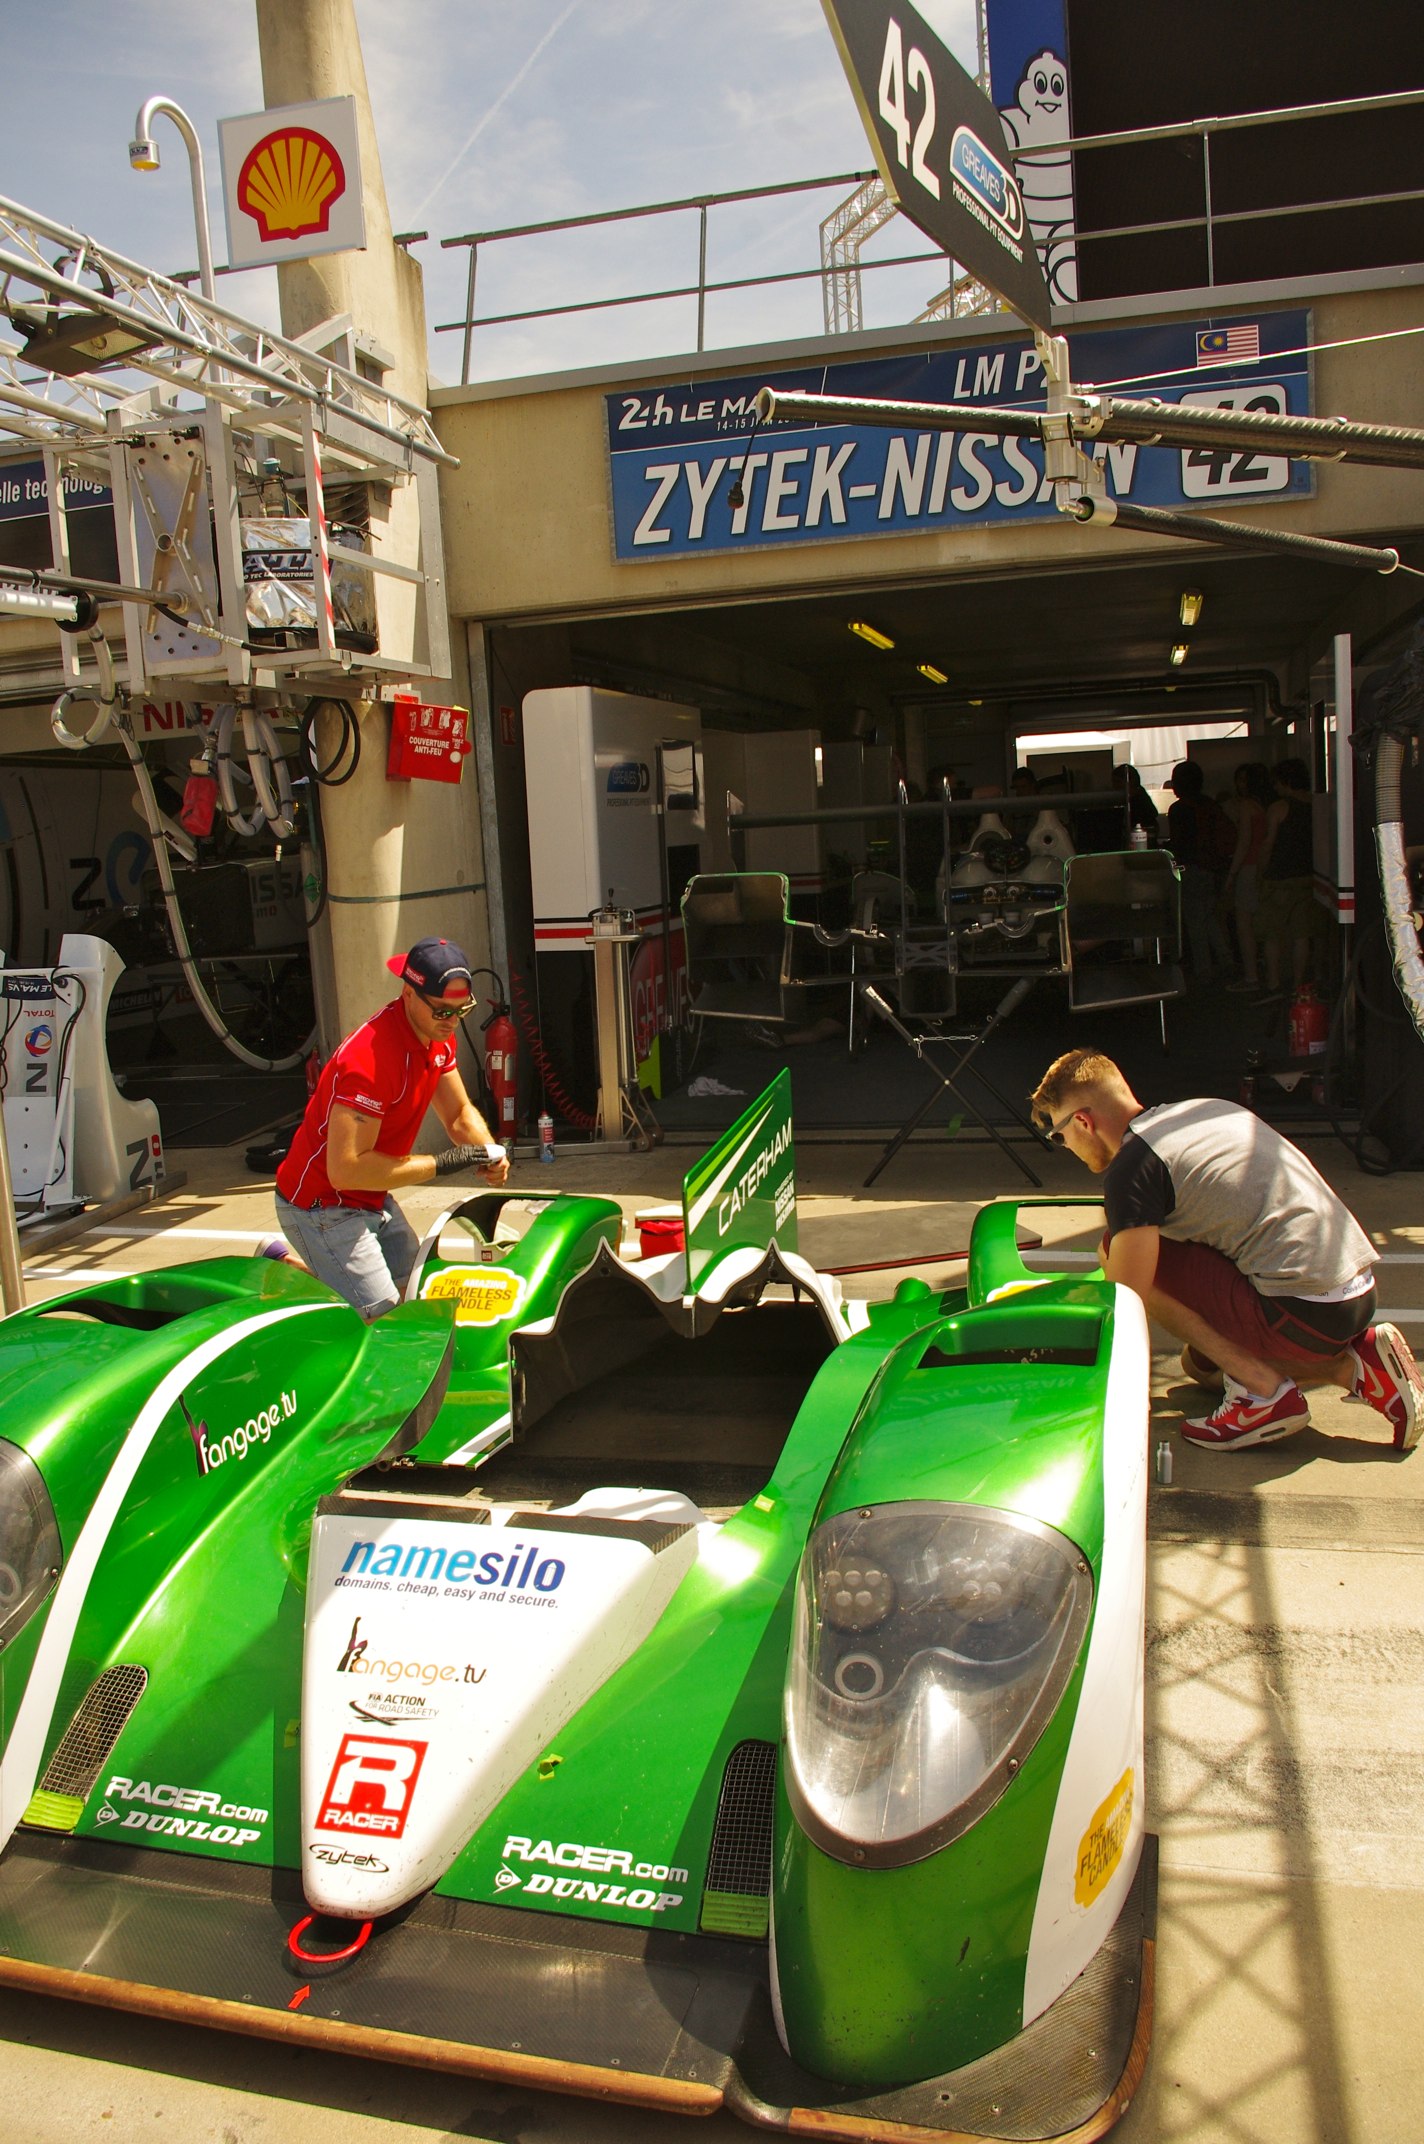 a group of men standing around a green race car